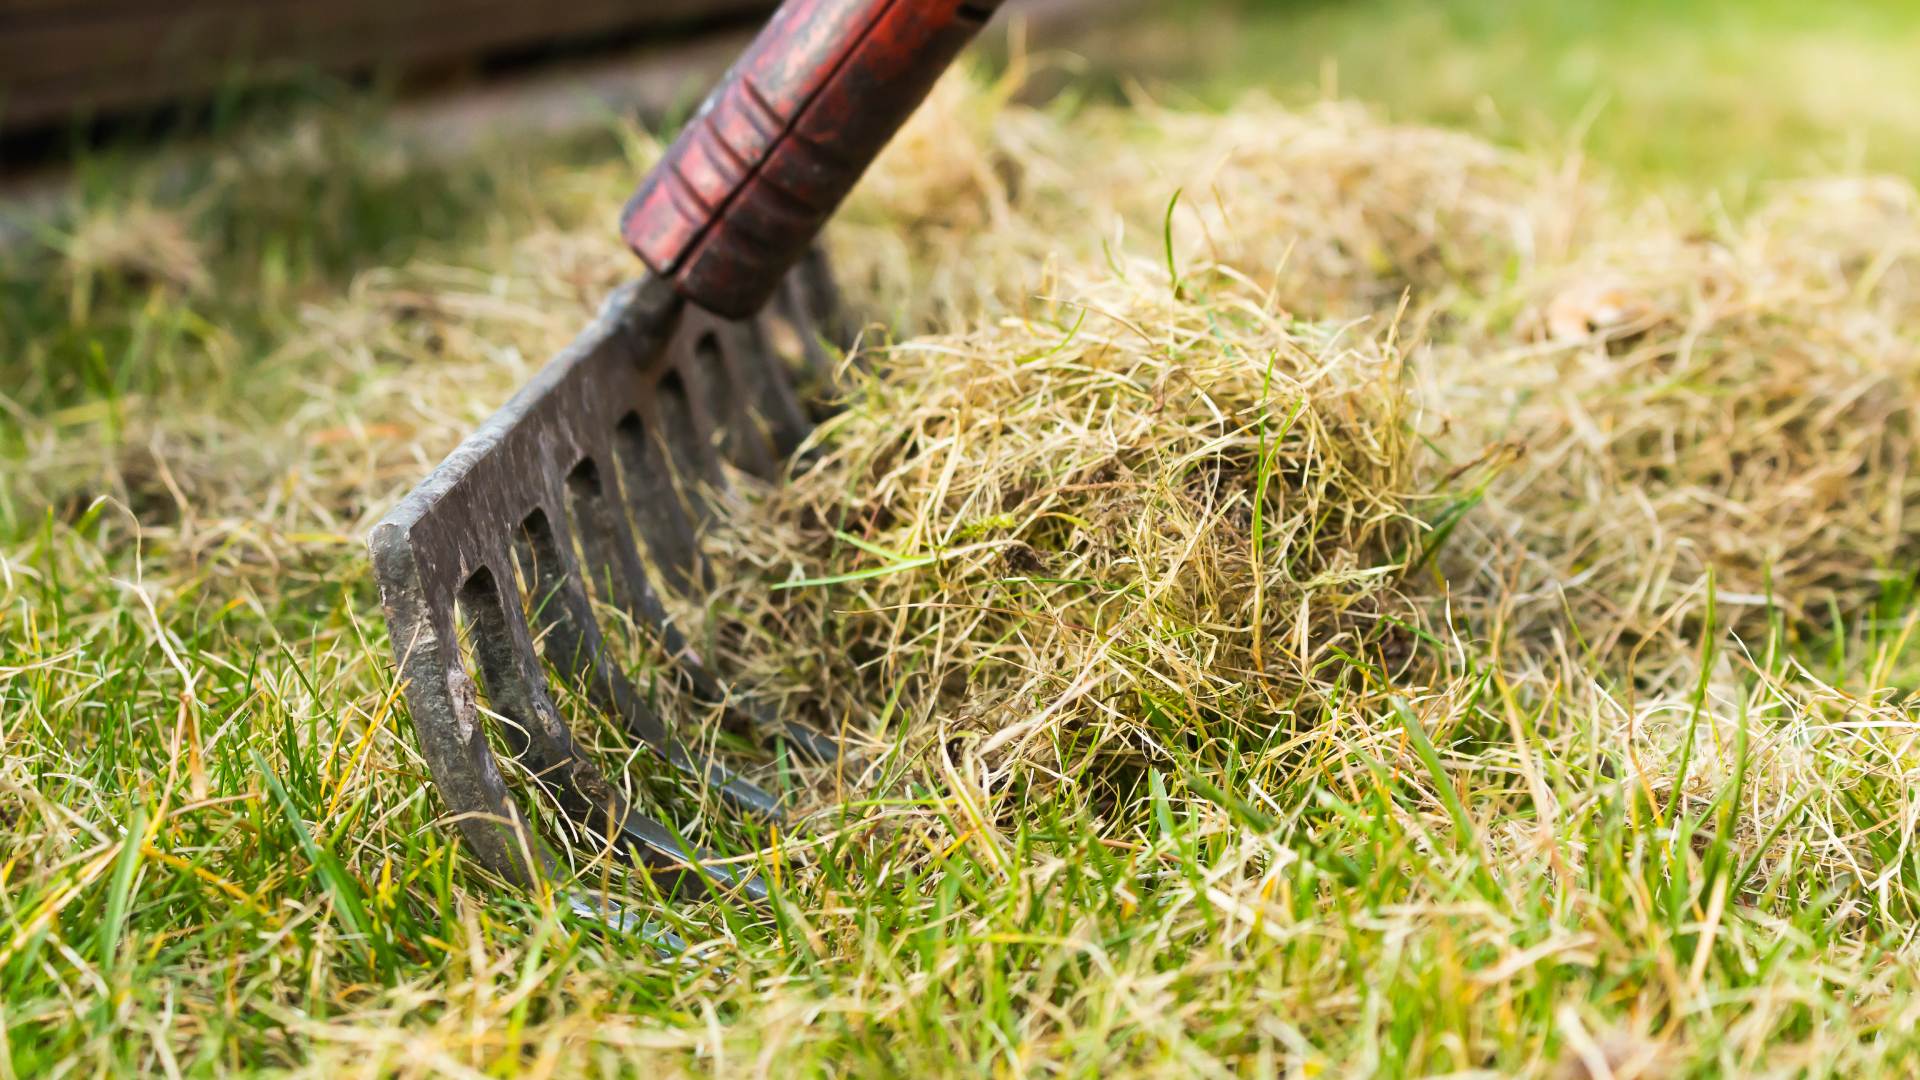 Does Your Lawn Have Too Much Thatch Build-up? Here's How to Find Out